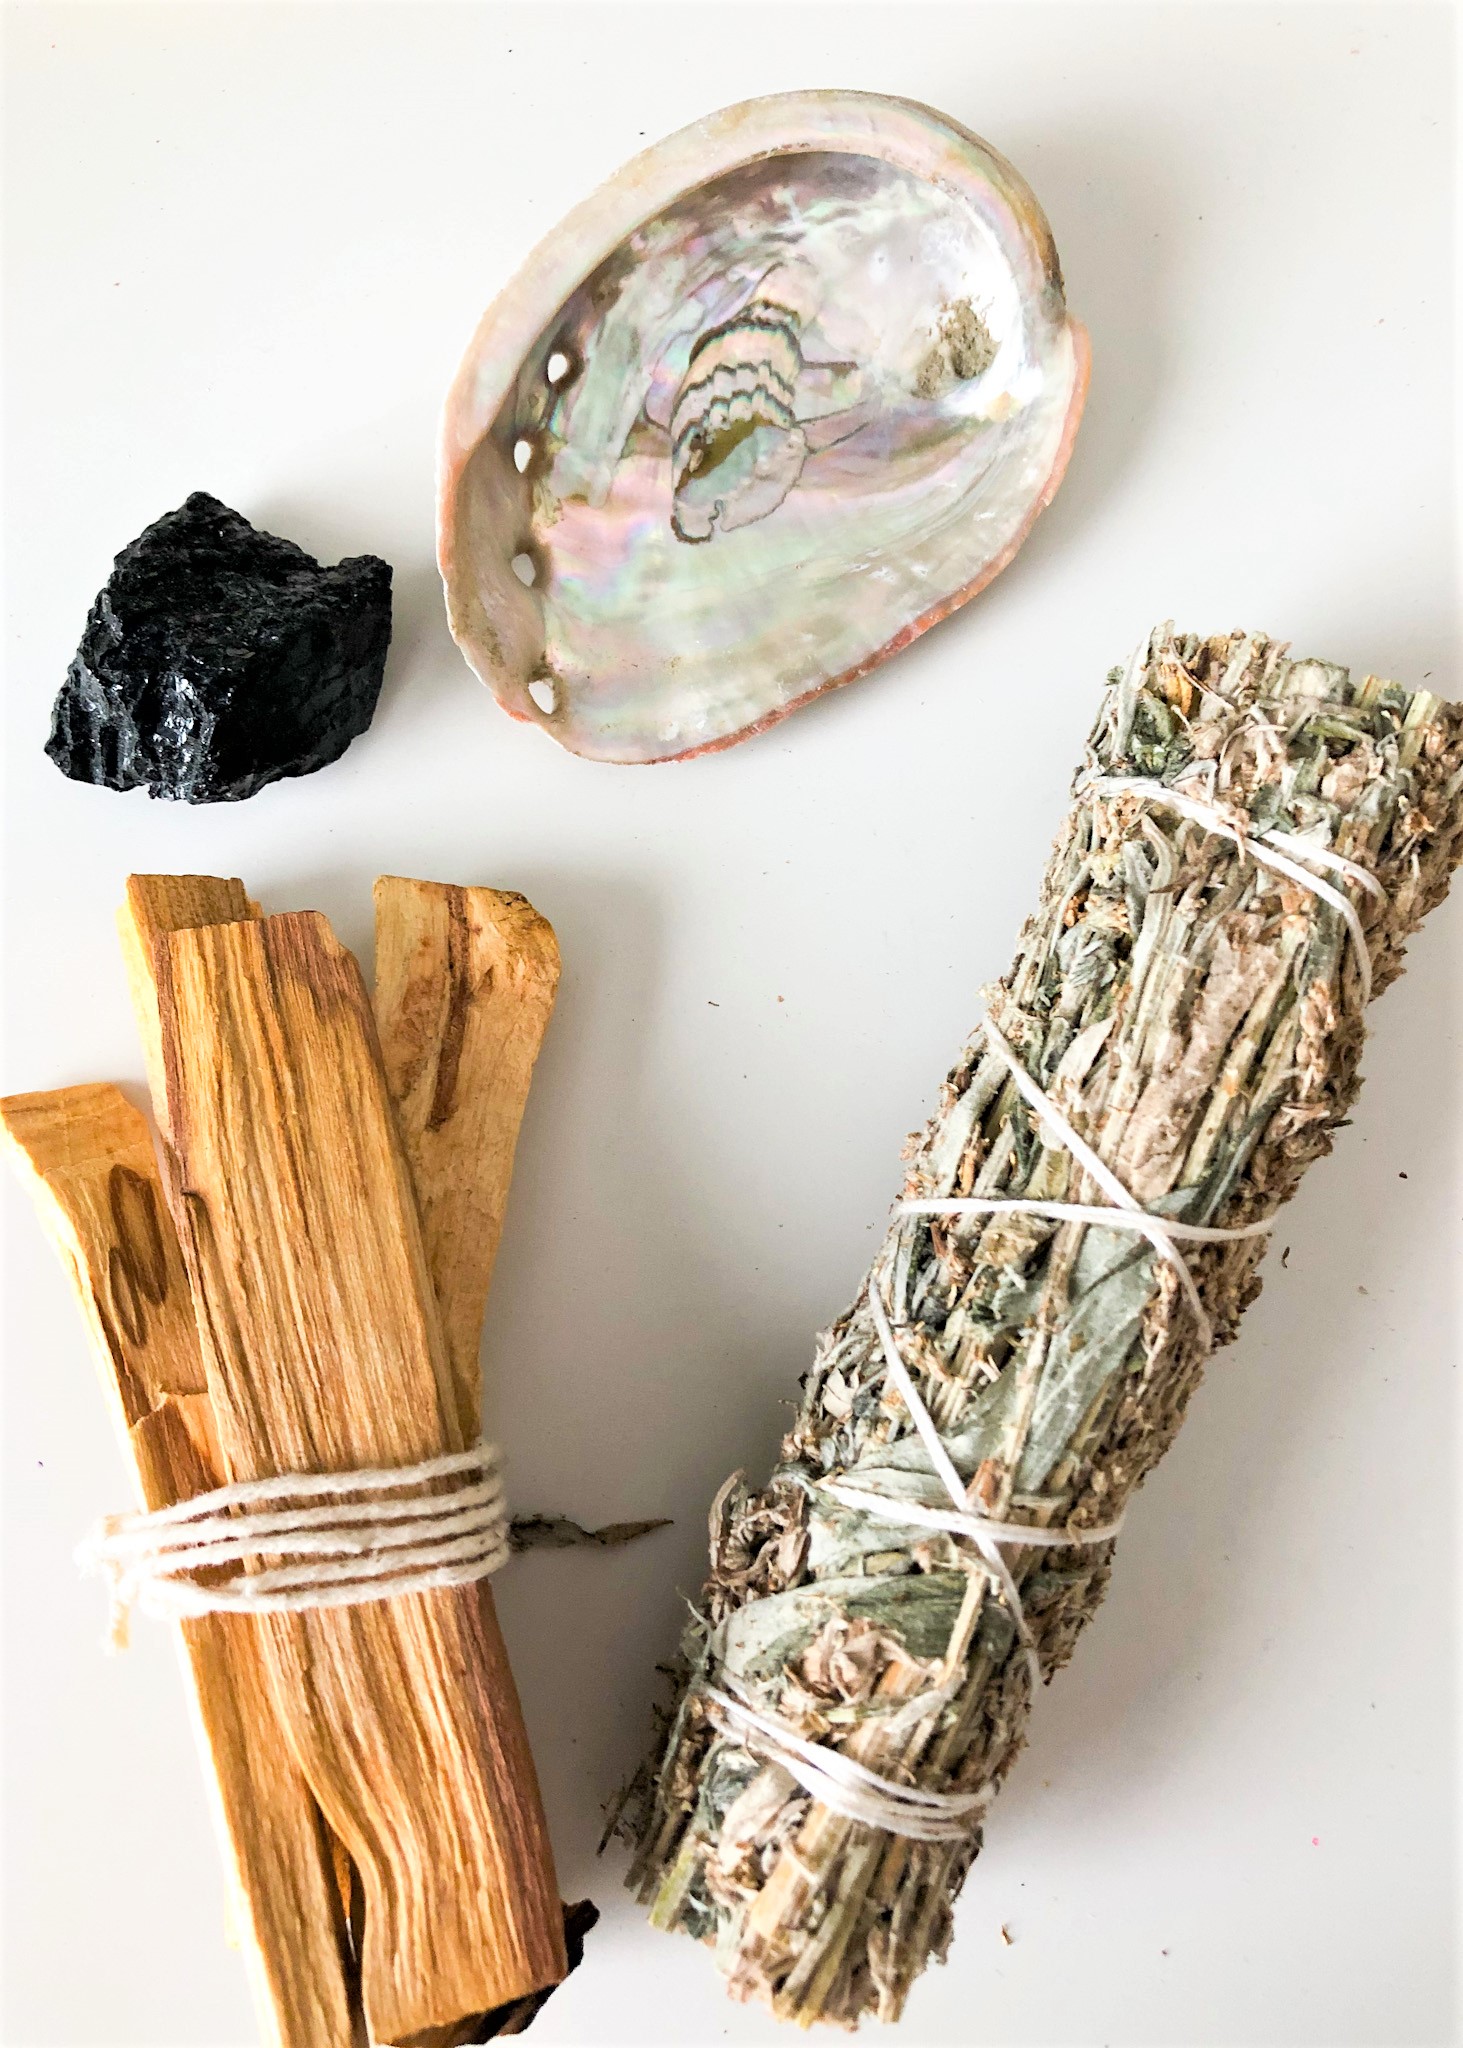 Palo Santo Essential Oil at the Dreaming Goddess